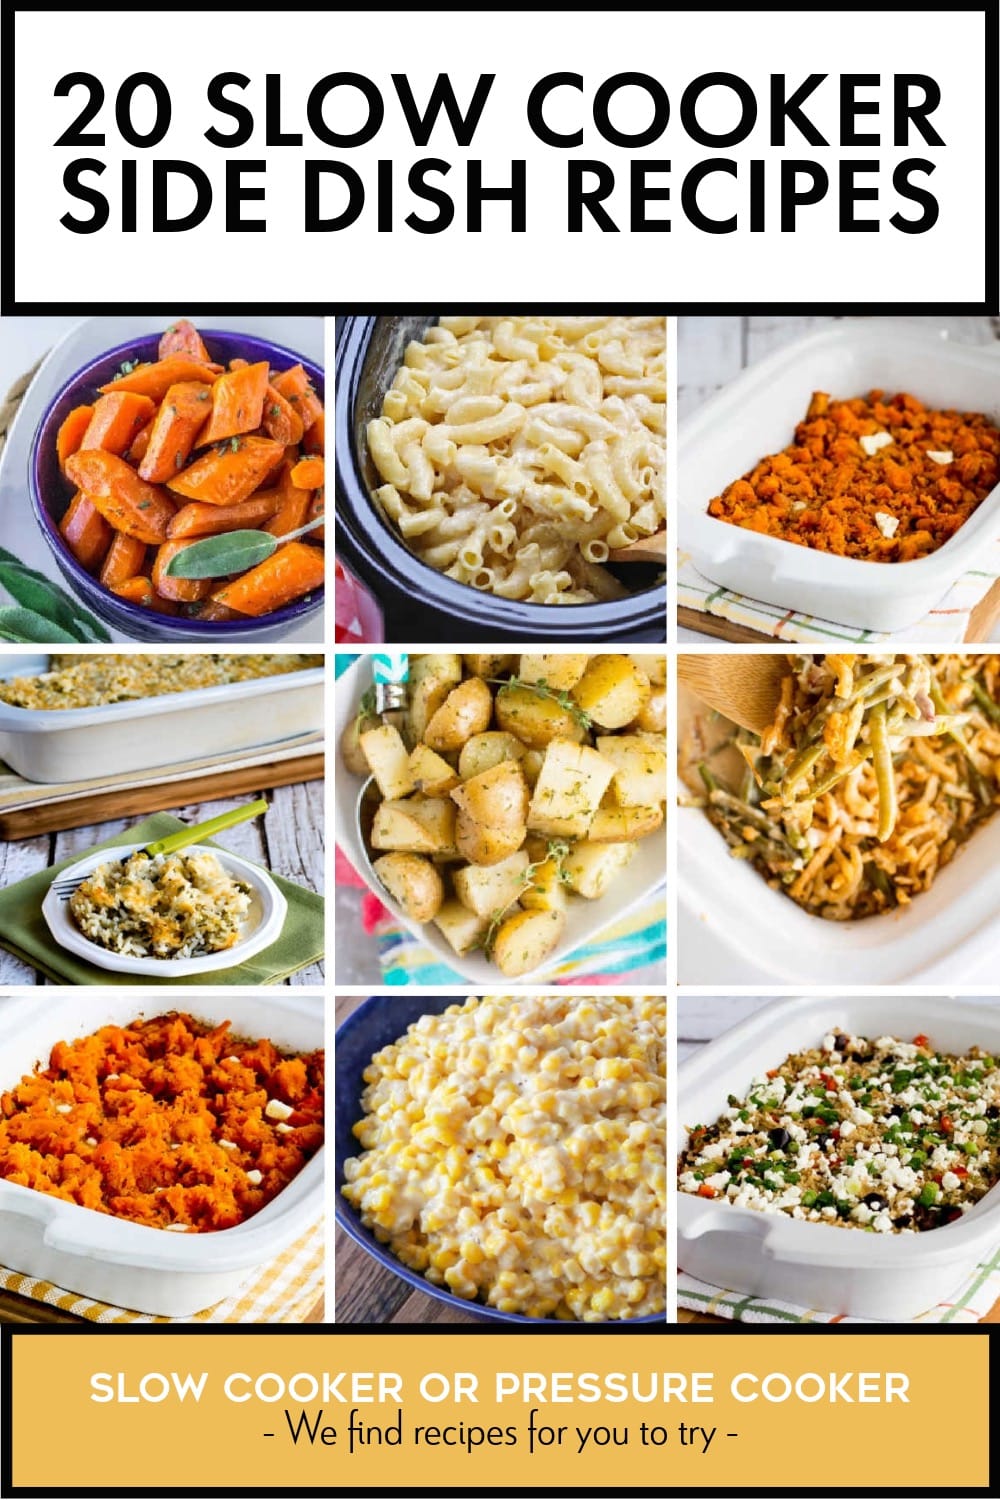 Pinterest image of 20 Slow Cooker Side Dish Recipes